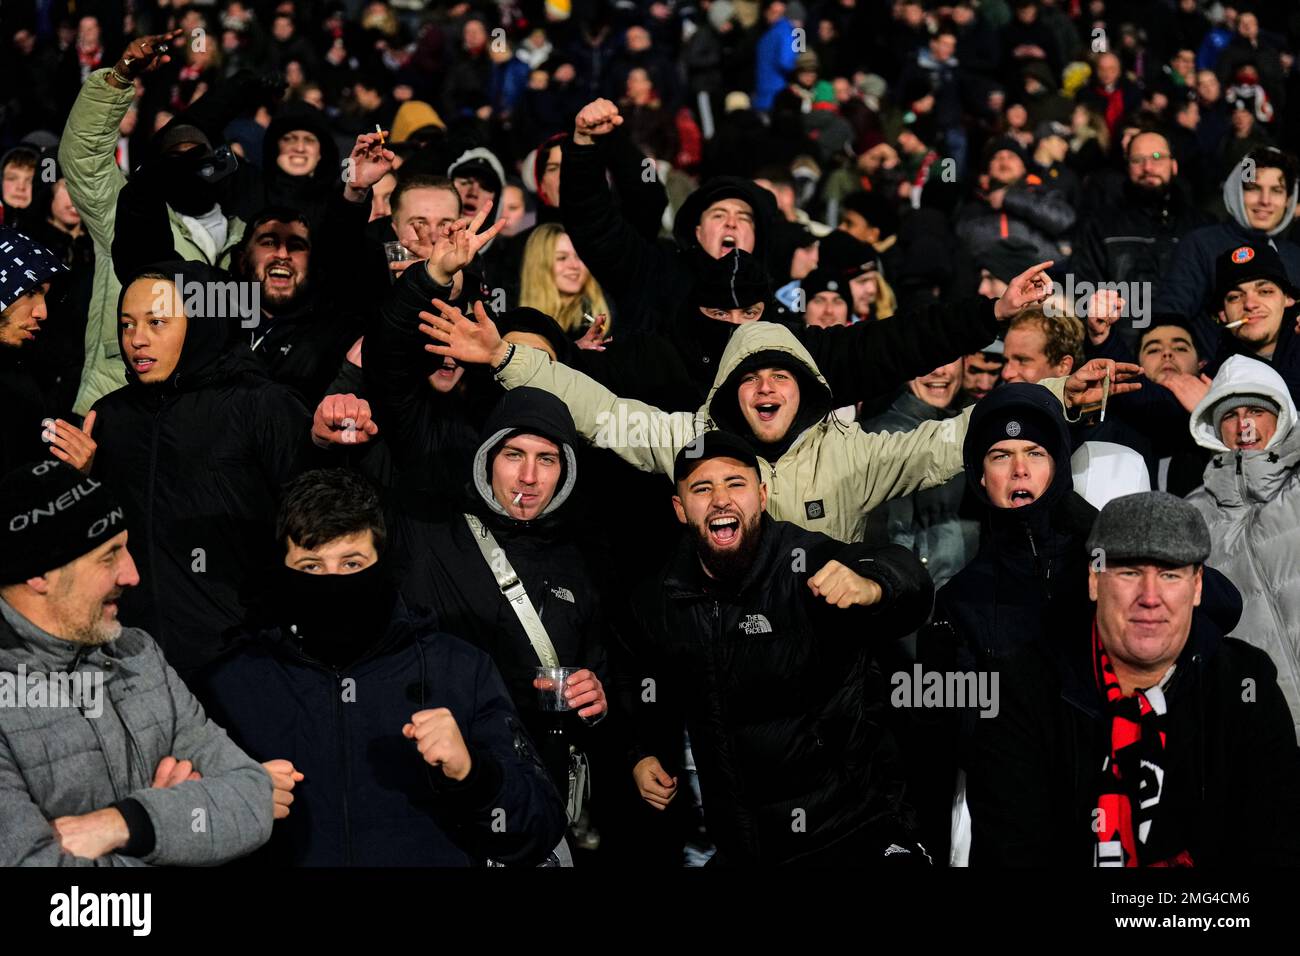 Rotterdam - Feyenoord supporters celebrating the 2-0 during the match between Feyenoord v NEC Nijmegen at Stadion Feijenoord De Kuip on 25 January 2023 in Rotterdam, Netherlands. (Box to Box Pictures/Yannick Verhoeven) Stock Photo